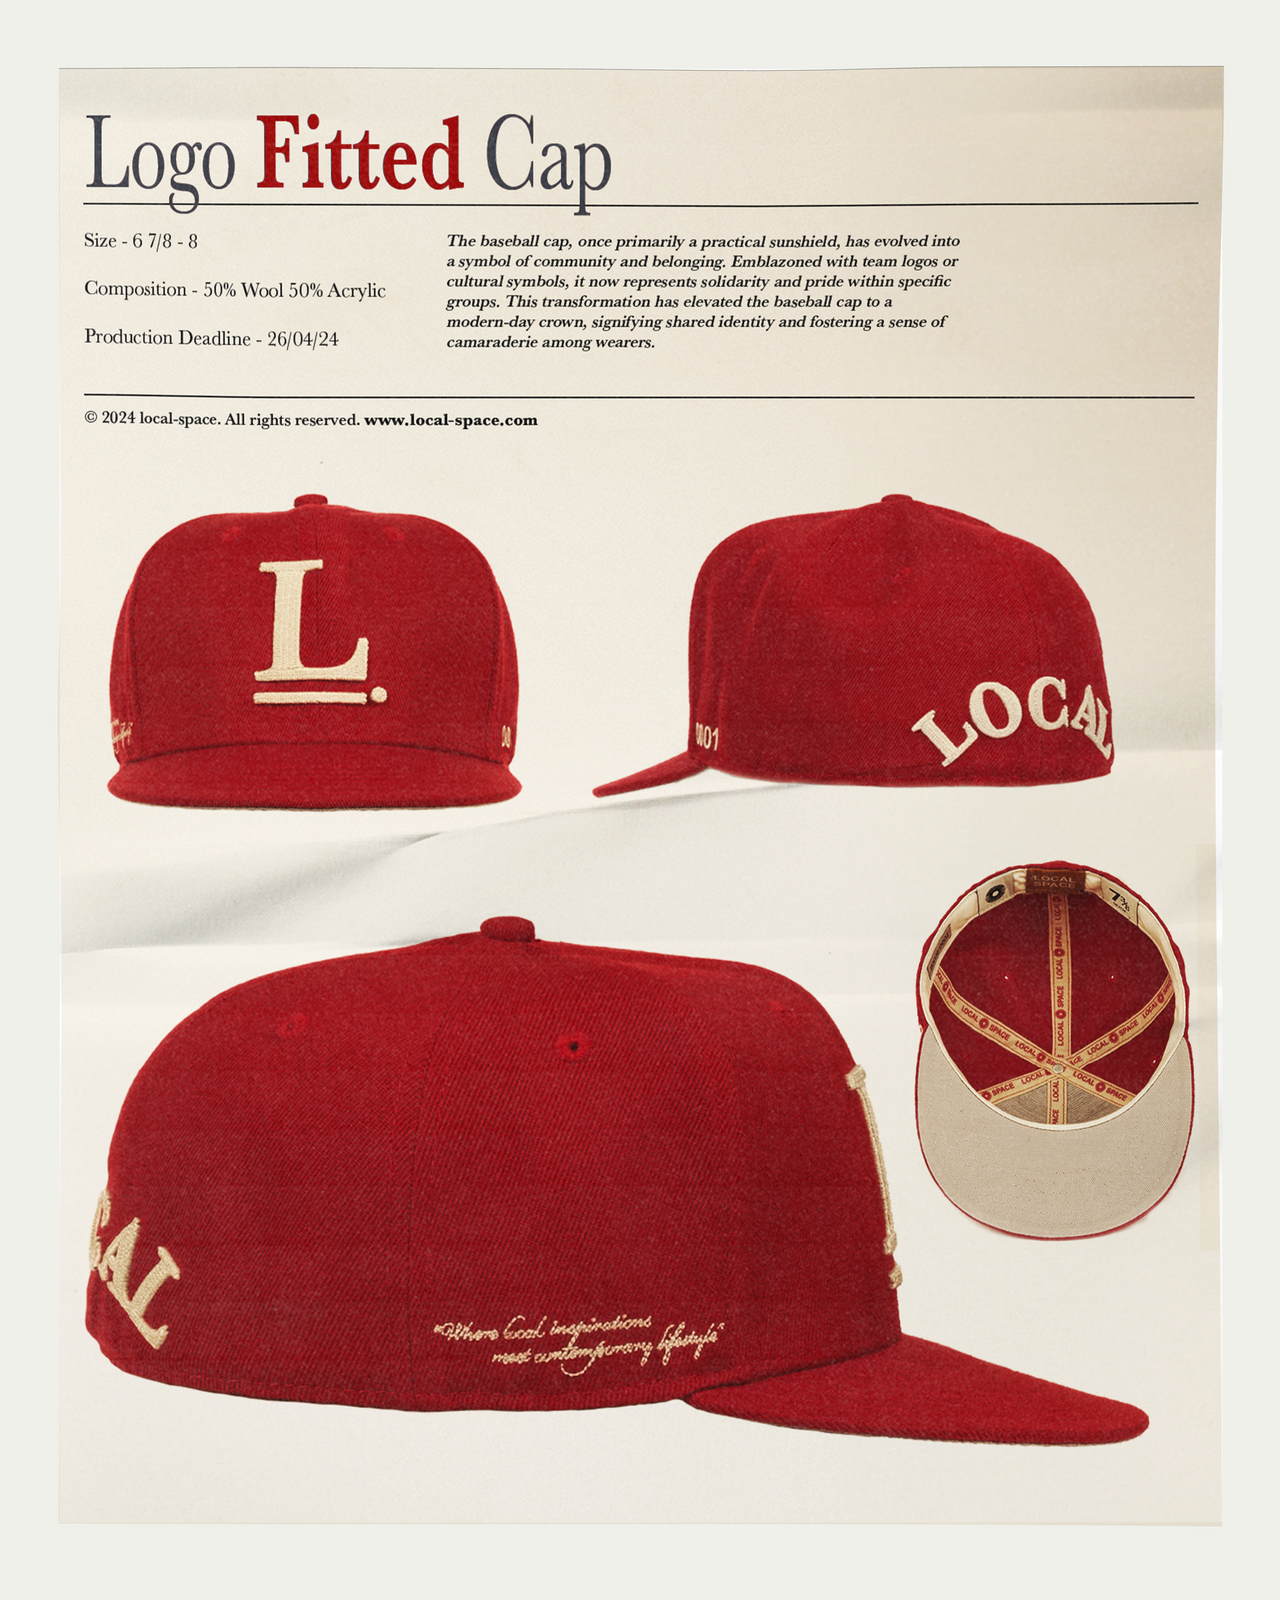 Red fitted baseball cap with Local Space emblem in 3D chain embroidery on the front, 'ISSUE 0001' on the left, and LOCAL logo on the rear, structured crown and flat brim with a grey underside.